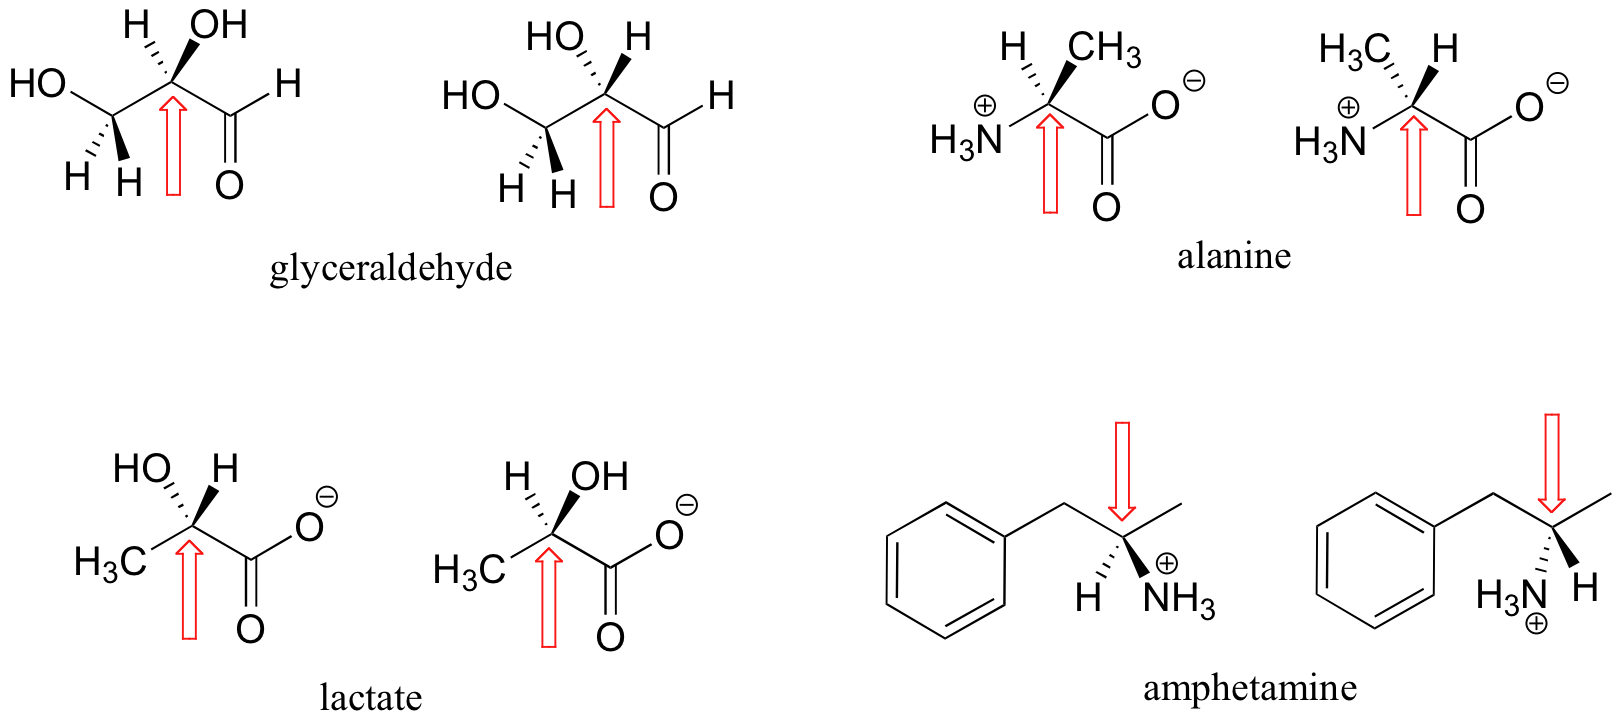 Structures of glyceraldehyde, alanine, lactate, and amphetamine.